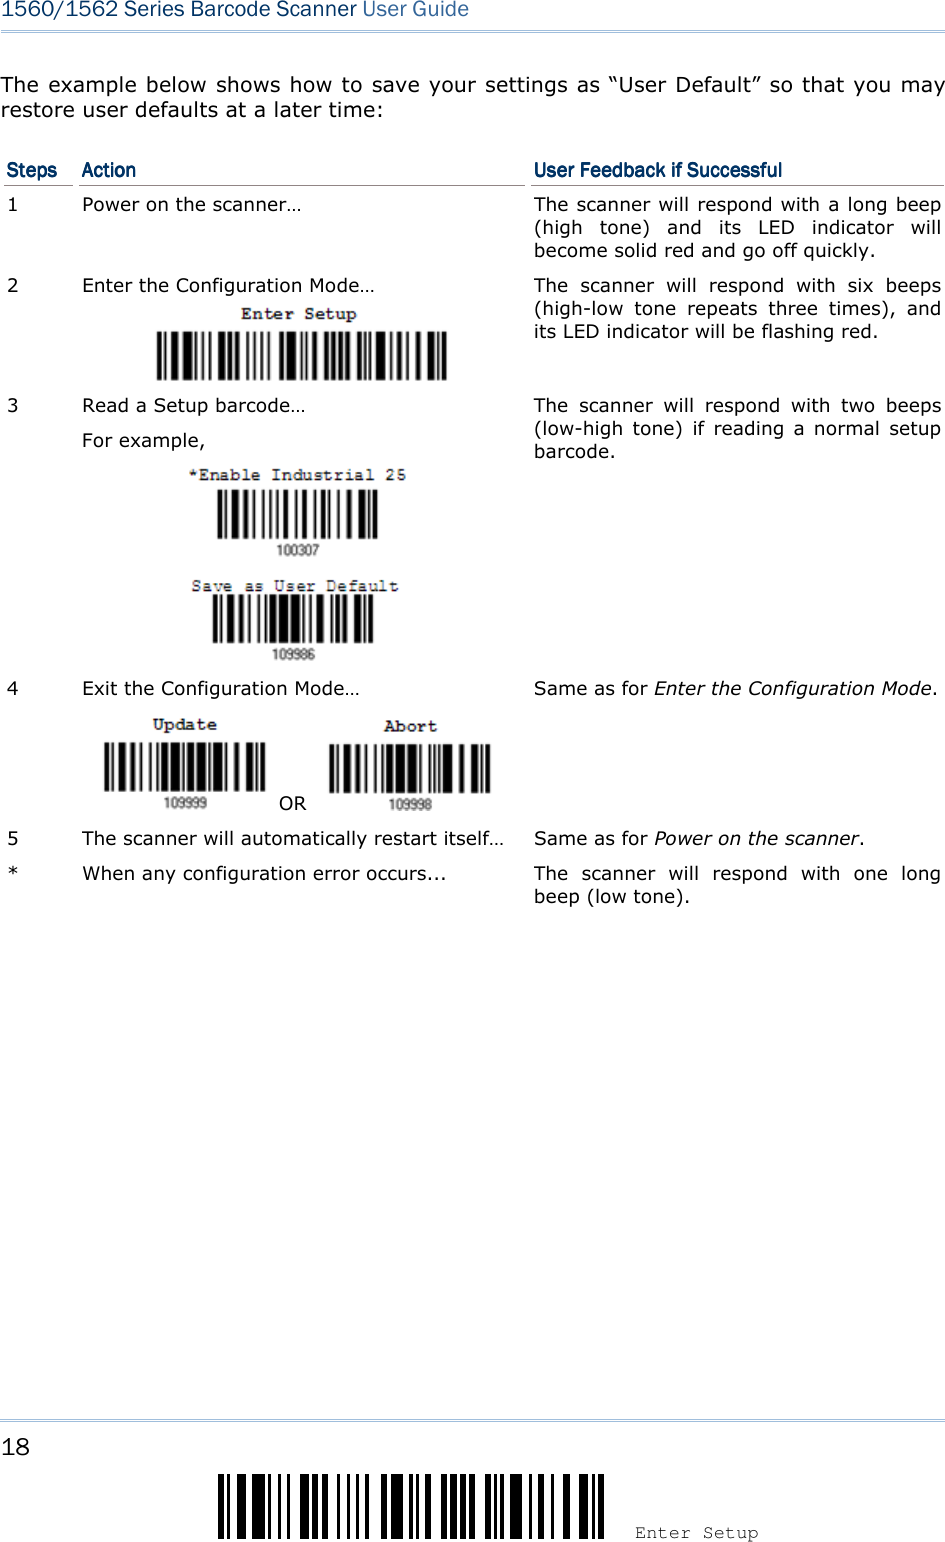 18 Enter Setup 1560/1562 Series Barcode Scanner User Guide  The example below shows how to save your settings as “User Default” so that you may restore user defaults at a later time: StepsStepsStepsSteps     ActiActiActiActionononon     User Feedback if SuccessfulUser Feedback if SuccessfulUser Feedback if SuccessfulUser Feedback if Successful    1  Power on the scanner…  The scanner will respond with a long beep (high  tone)  and  its  LED  indicator  will become solid red and go off quickly. 2  Enter the Configuration Mode…  The  scanner  will  respond  with  six  beeps (high-low  tone  repeats  three  times),  and its LED indicator will be flashing red.  3  Read a Setup barcode… For example,                         The  scanner  will  respond  with  two  beeps (low-high  tone)  if  reading  a normal  setup barcode. 4  Exit the Configuration Mode…   OR     Same as for Enter the Configuration Mode. 5  The scanner will automatically restart itself…  Same as for Power on the scanner. *  When any configuration error occurs... The  scanner  will  respond  with  one  long beep (low tone).  